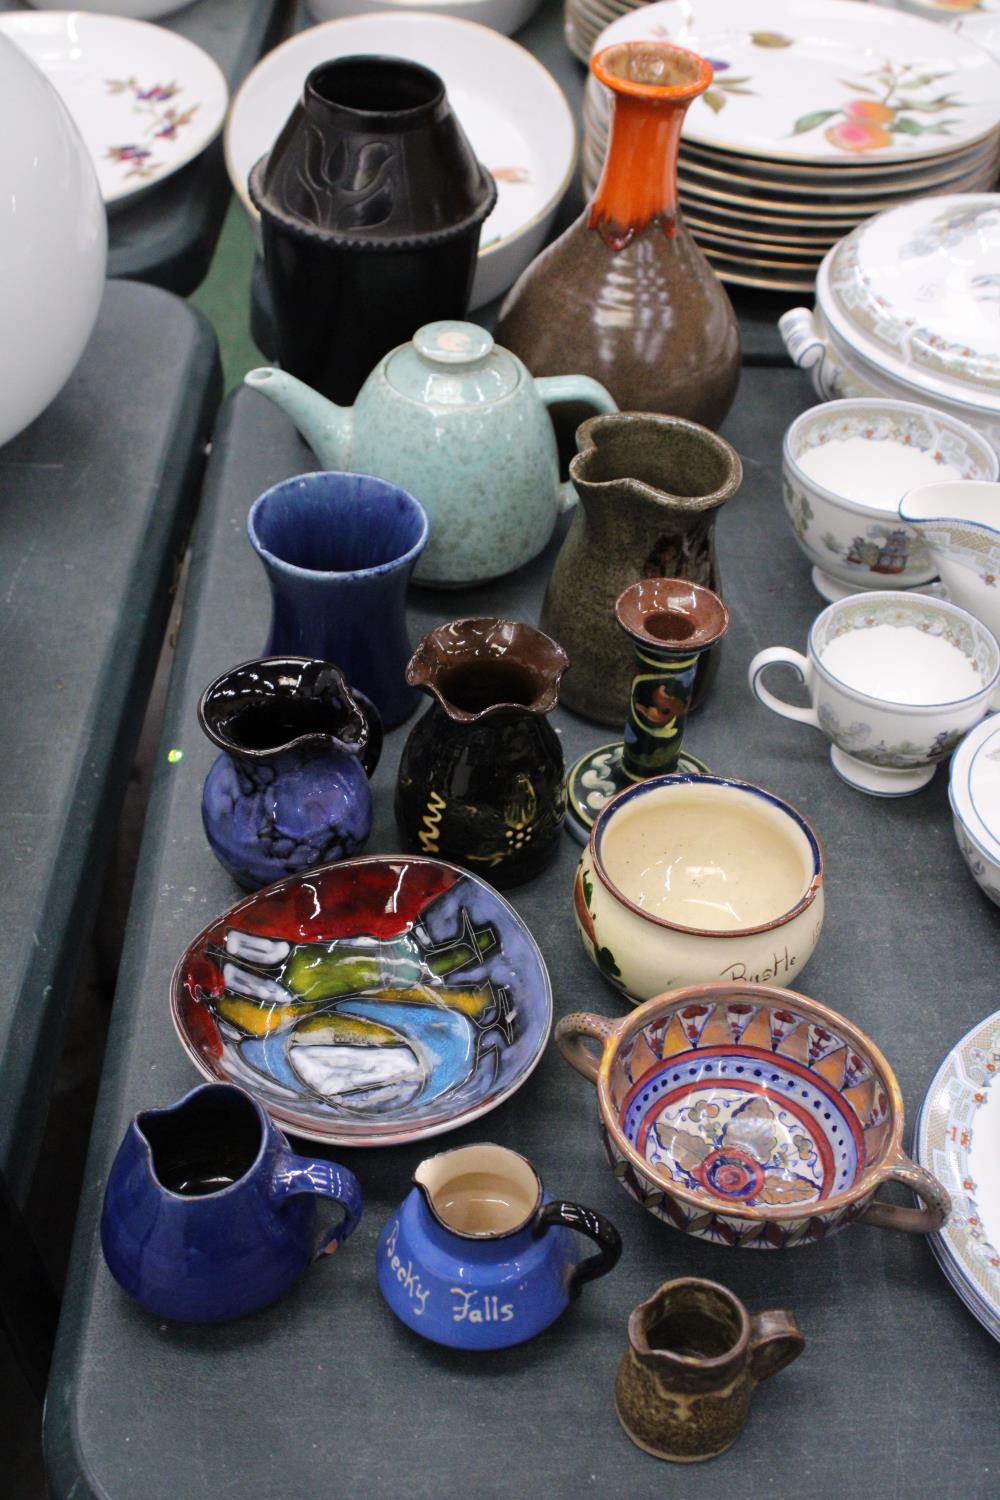 A QUANTITY OF STUDIO POTTERY TO INCLUDE A TEAPOT, CANDLE HOLDER, BOWLS ETC - SOME WITH MARKS TO